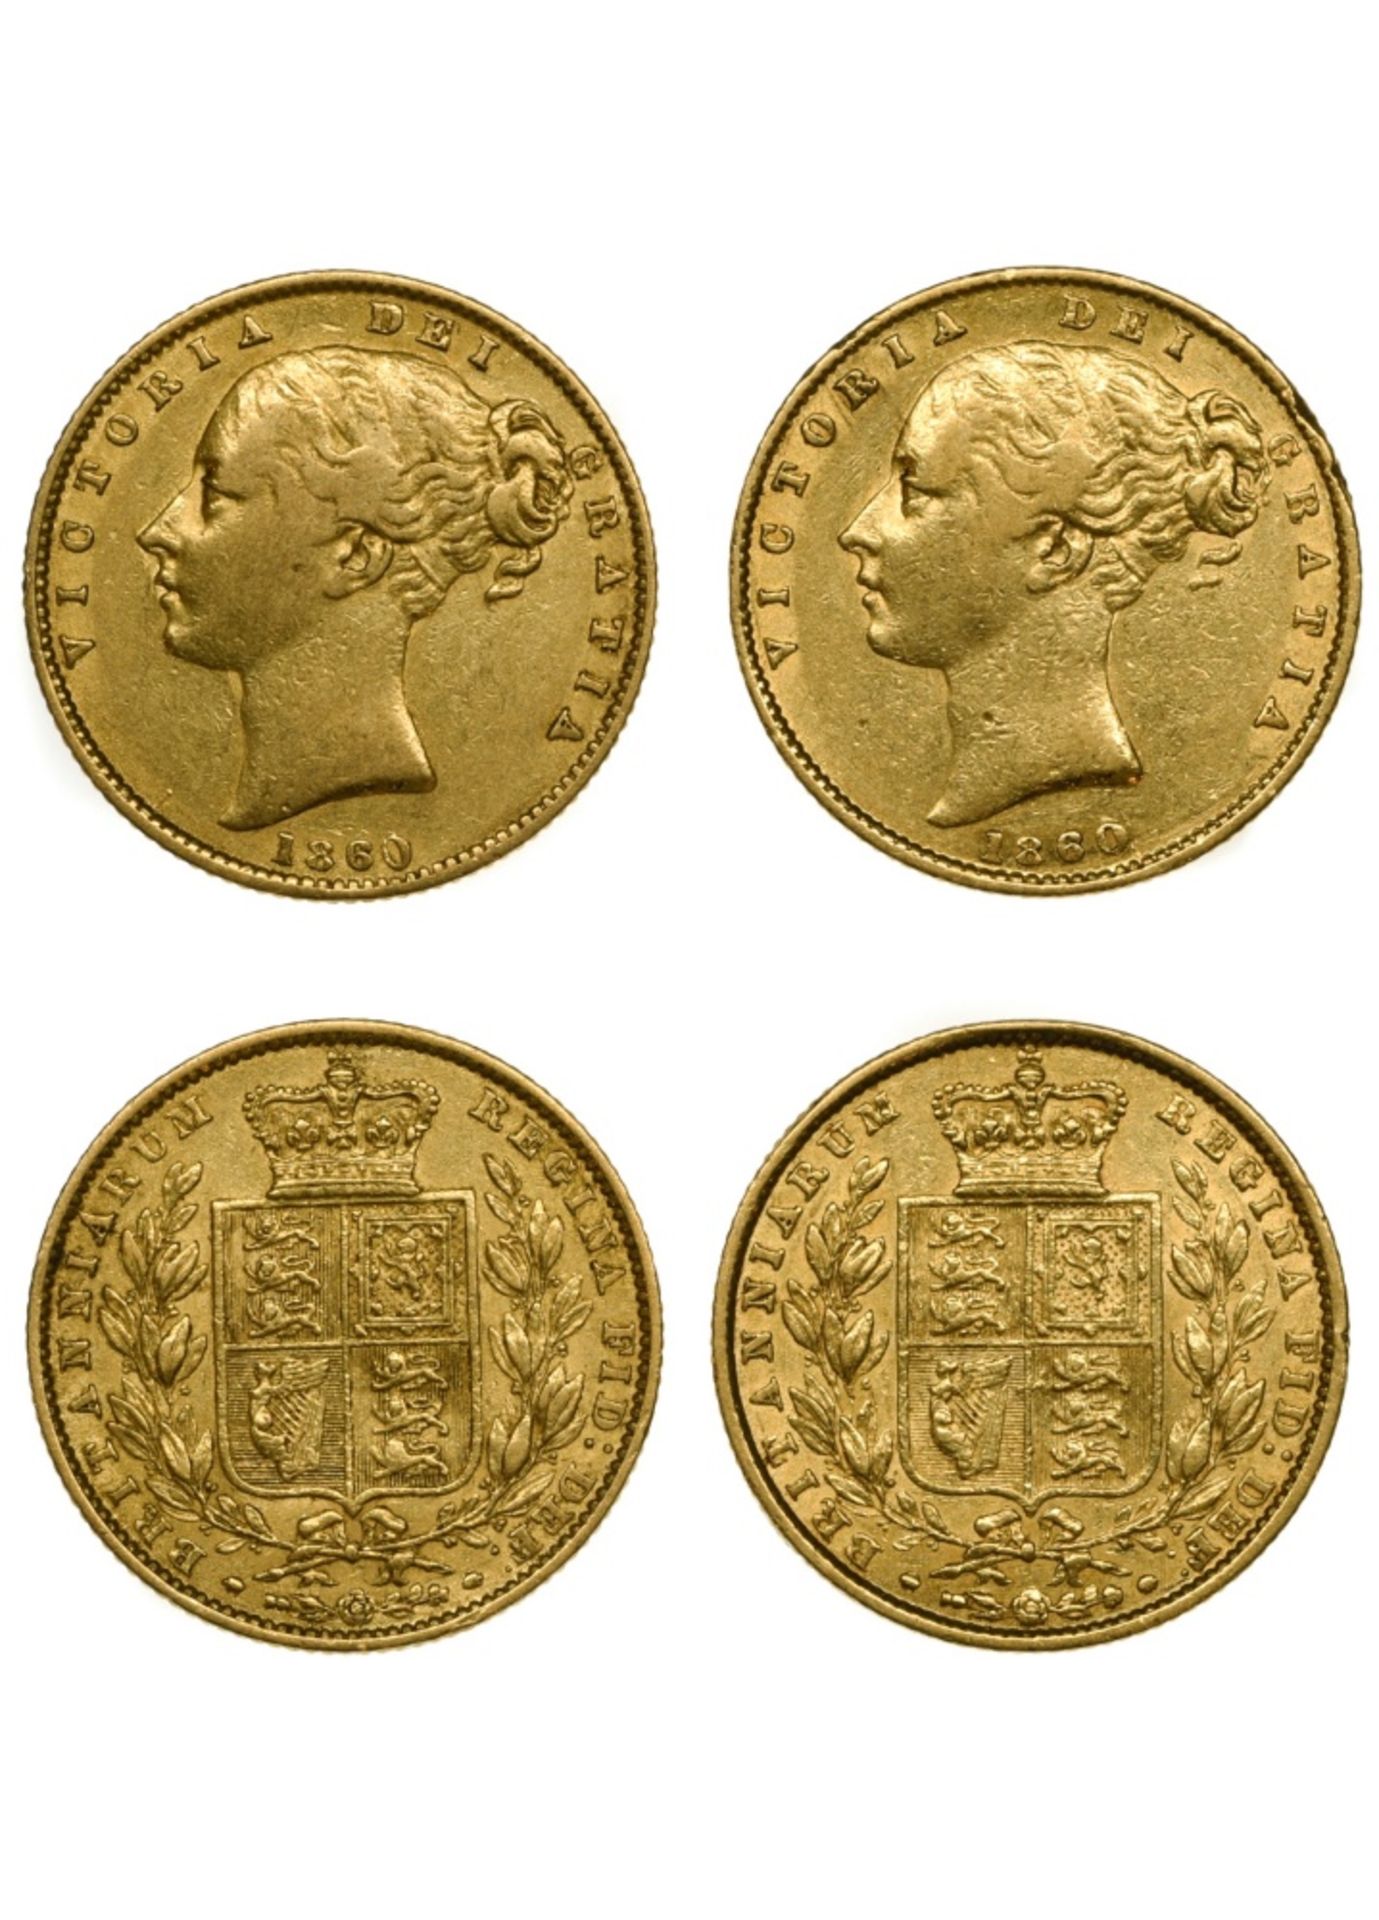 Great Britain Victoria (1837-1901), Sovereign (2), 1860, 1860 large 0 (Marsh 43 ; S.3852D). 1860,